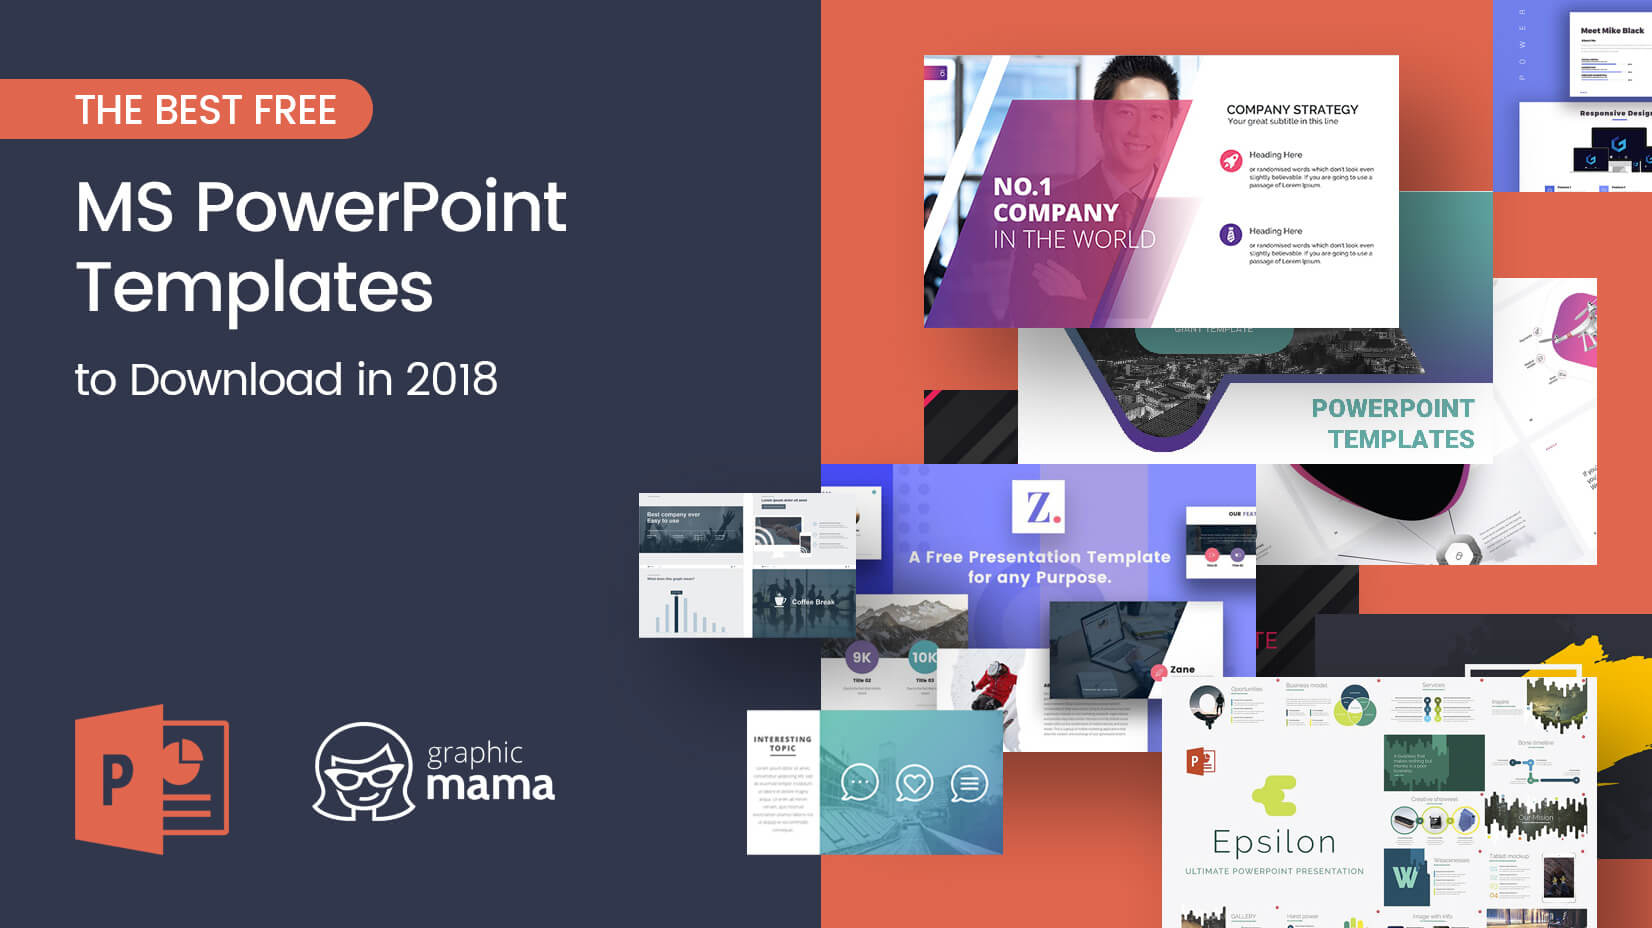 The Best Free Powerpoint Templates To Download In 2018 Regarding Powerpoint Slides Design Templates For Free